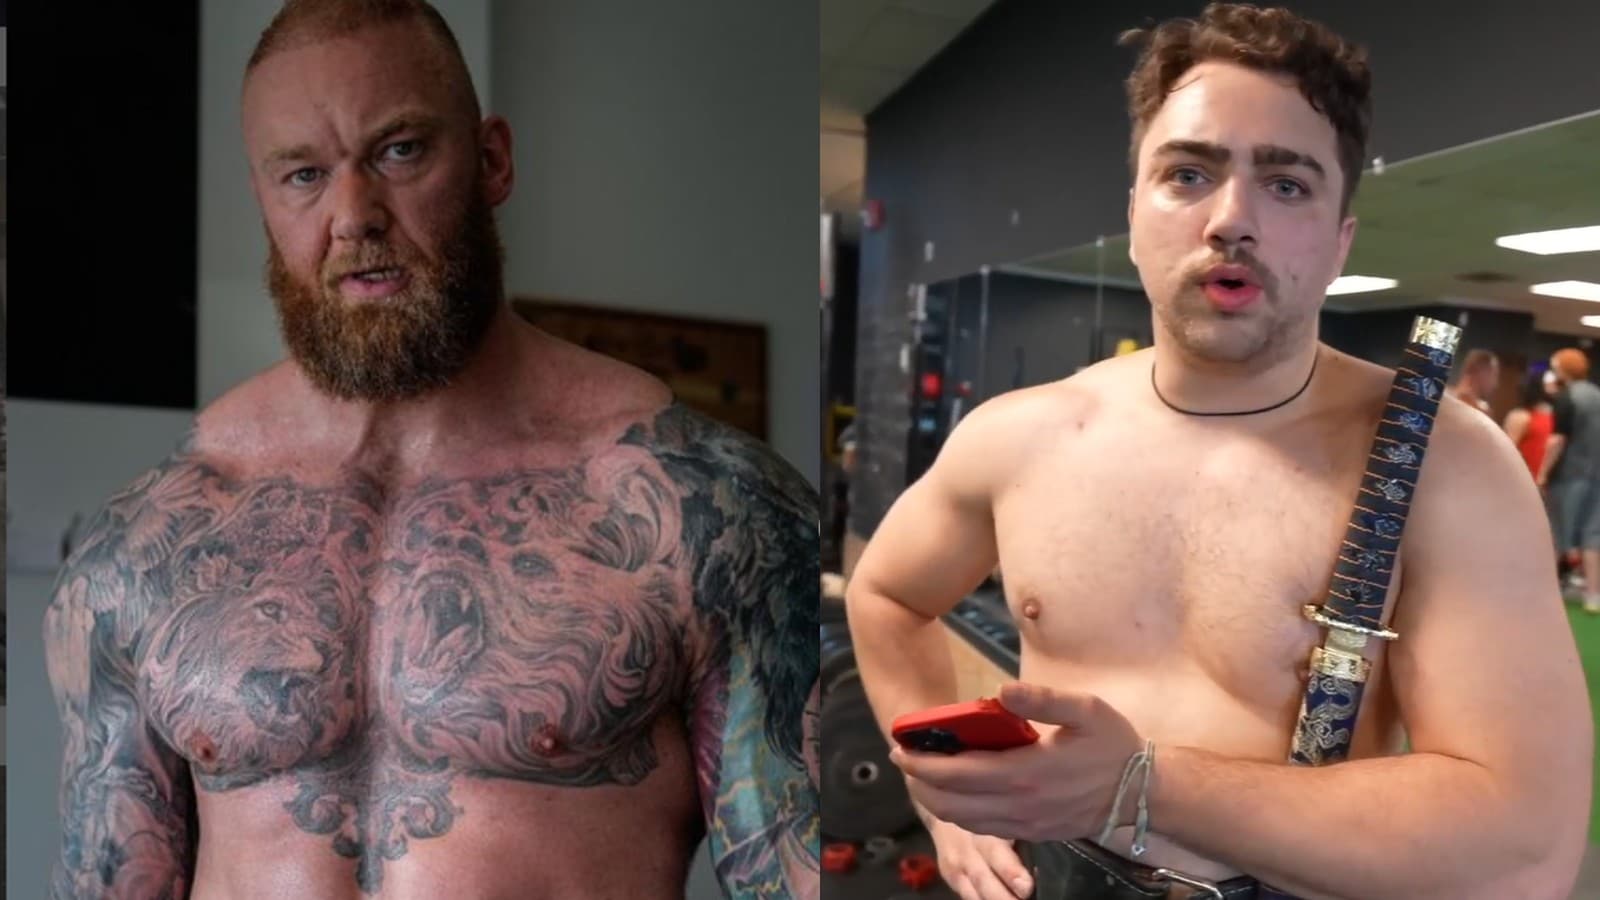 Game of Thrones star Hafthor ‘The Mountain’ Bjornsson and Twitch streamer Mizkif working out in the gym